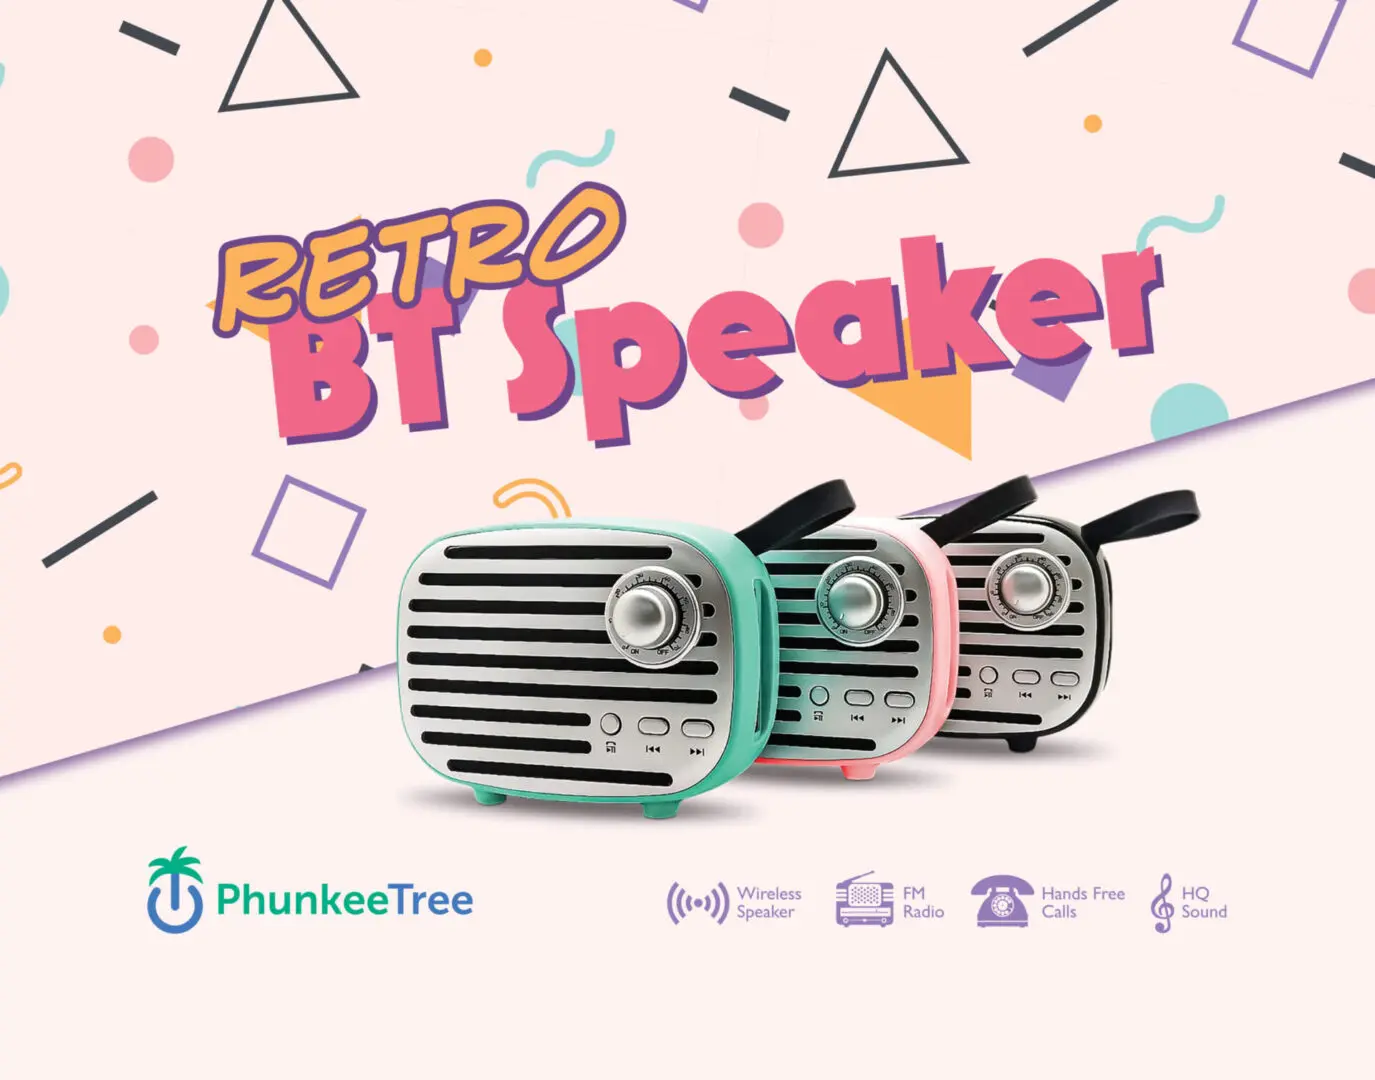 Advertisement for retro bluetooth speakers with modern features like wireless operation and hands-free calls, set against a playful, geometric background.